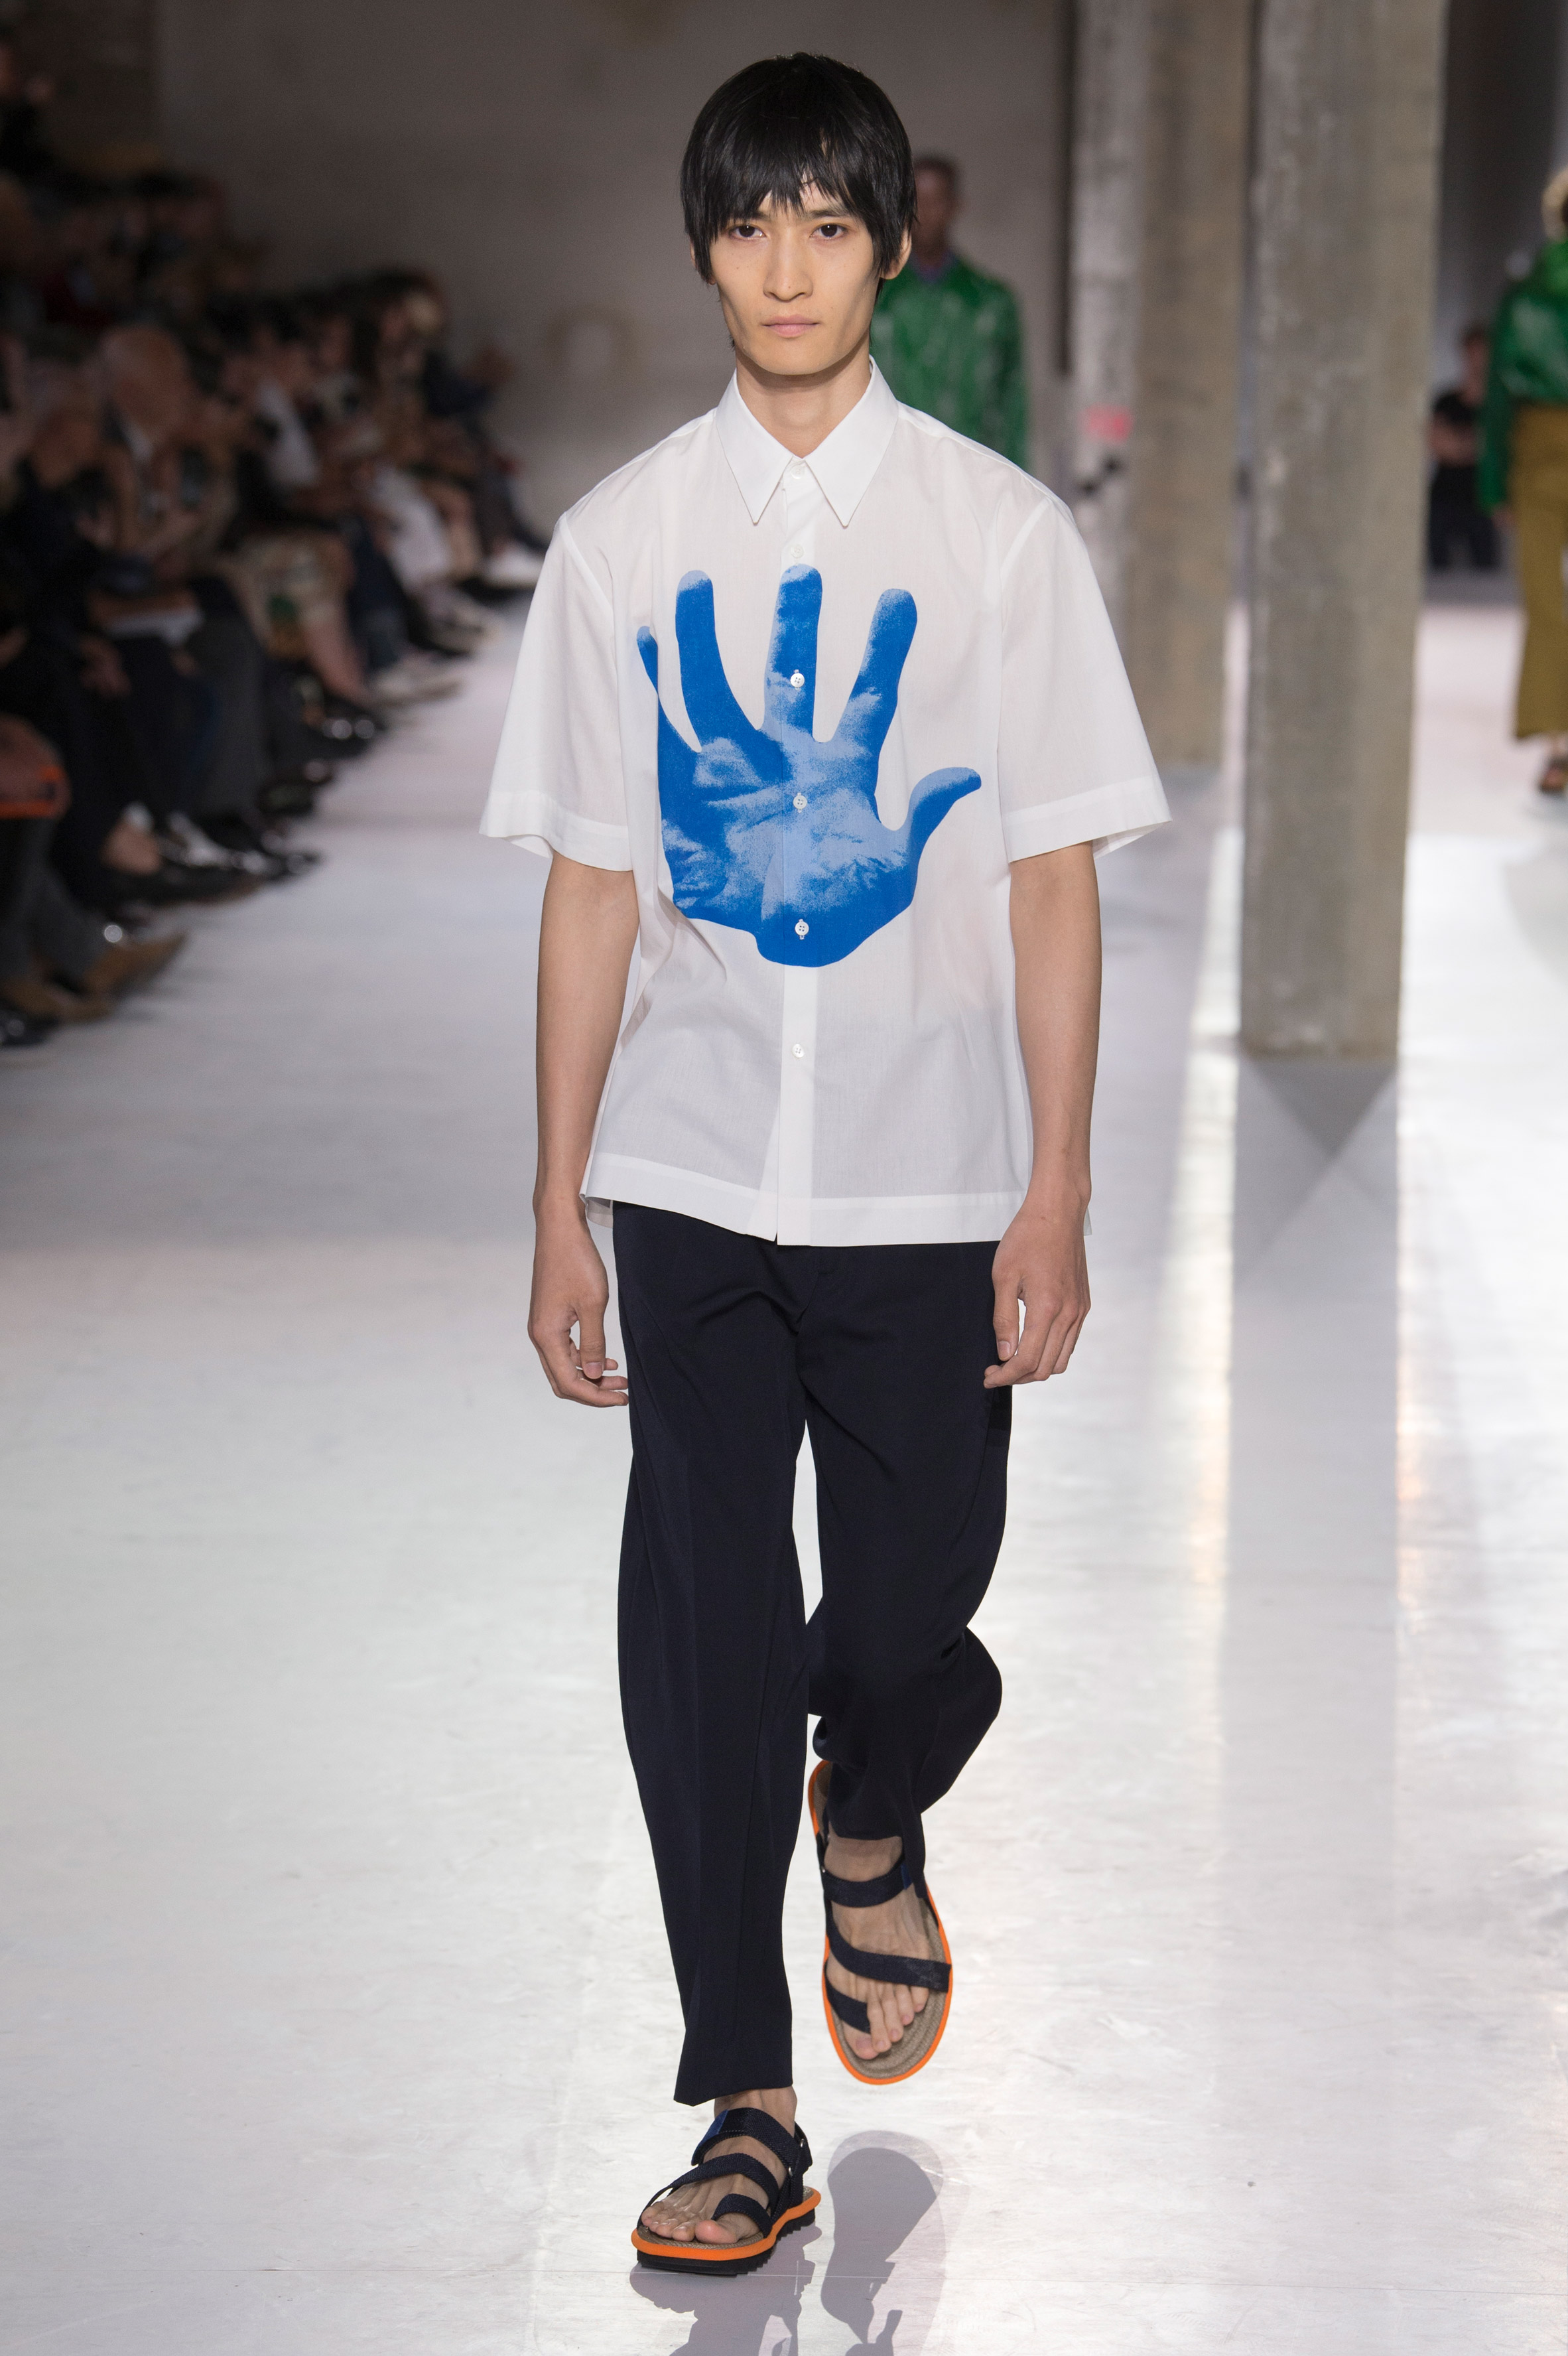 Dries Van Noten pays homage to Verner Panton with colourful